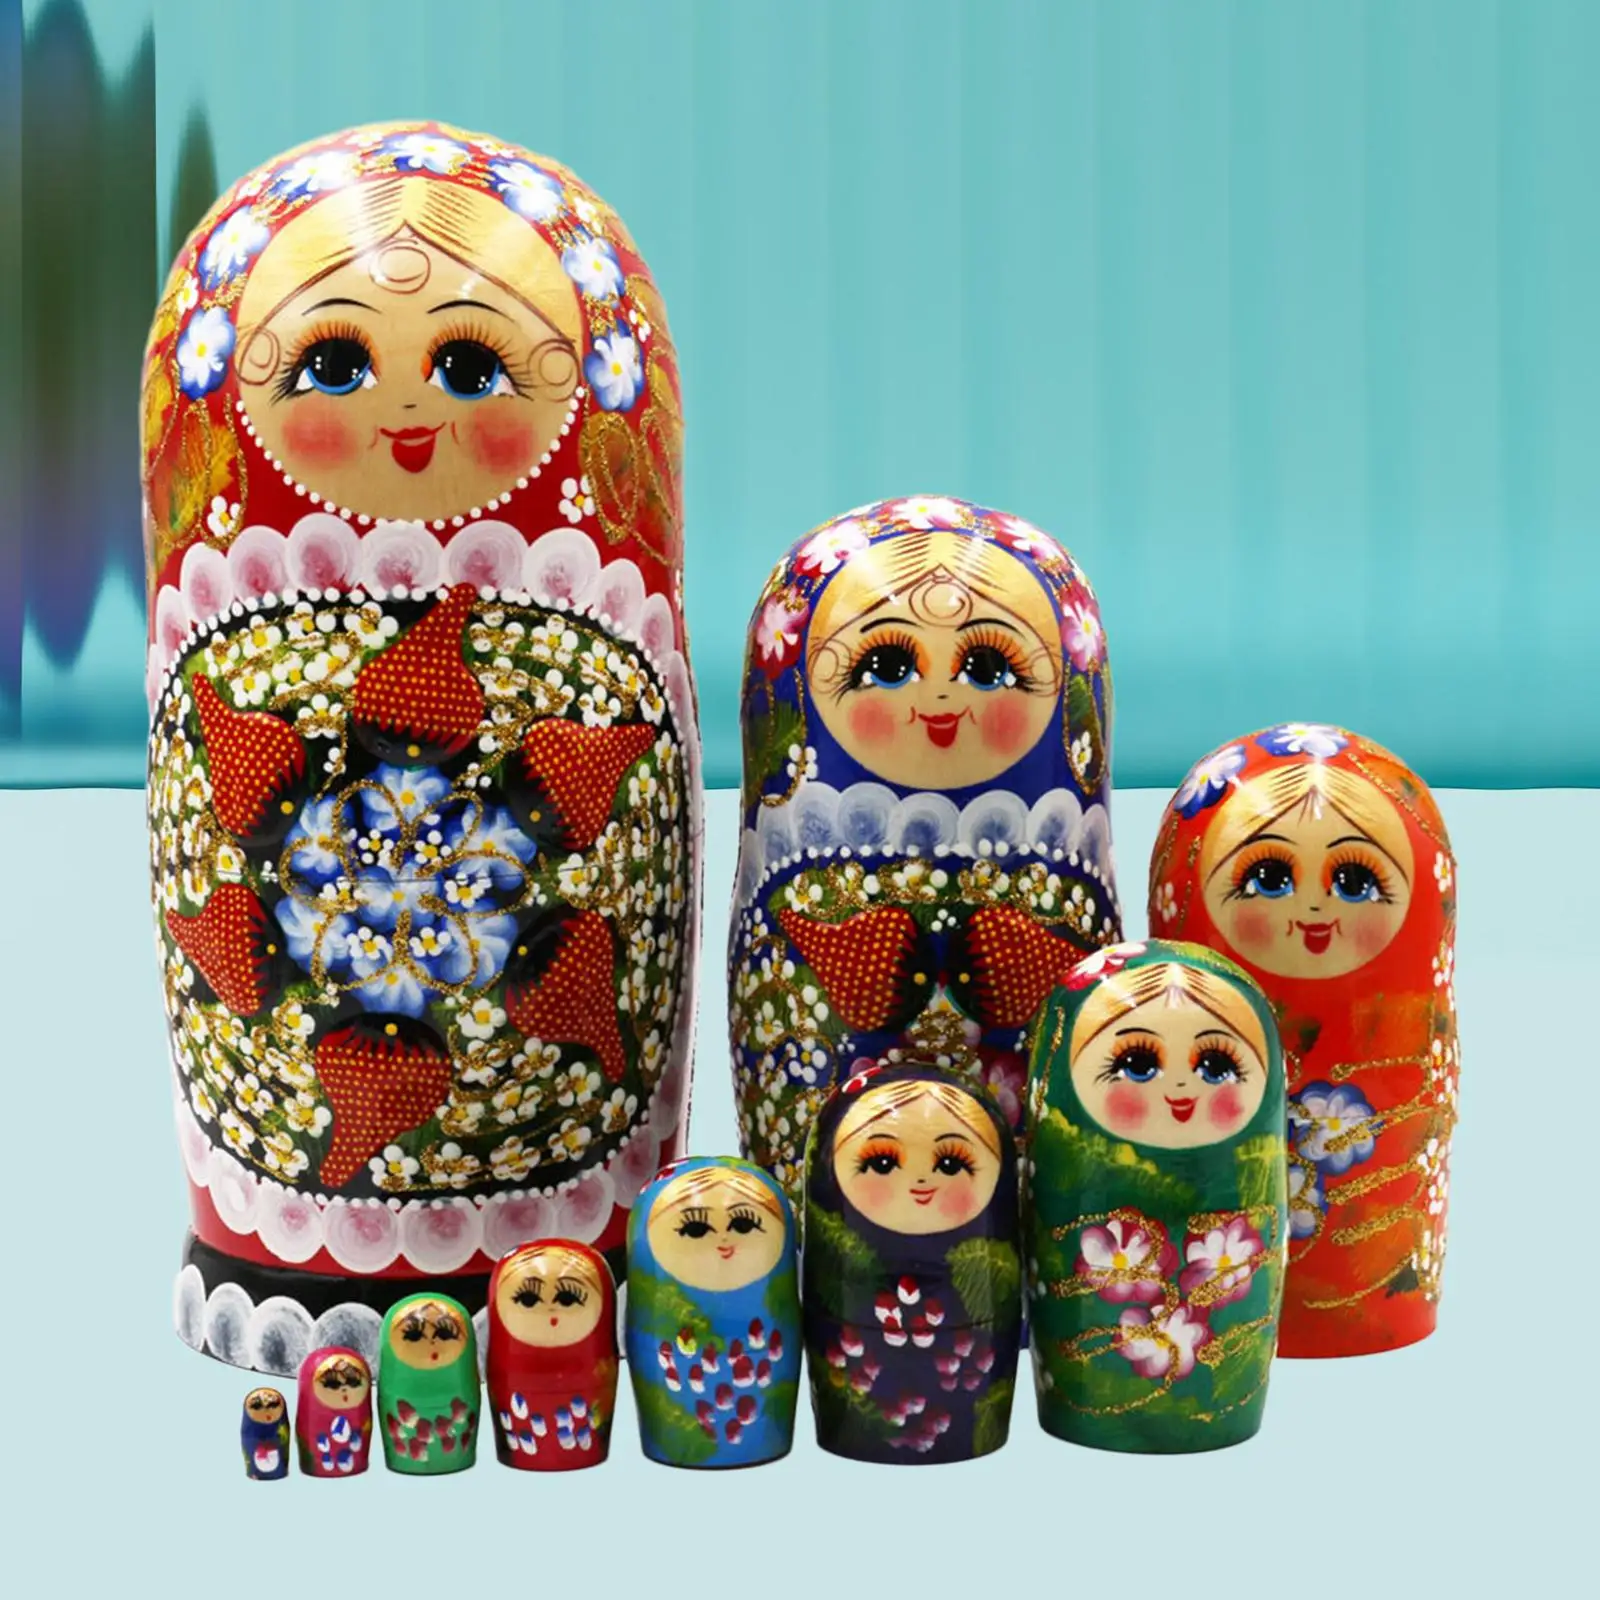 10x Nesting Doll Toy Desk Birthday Gifts Tabletop Handpainted Decoration